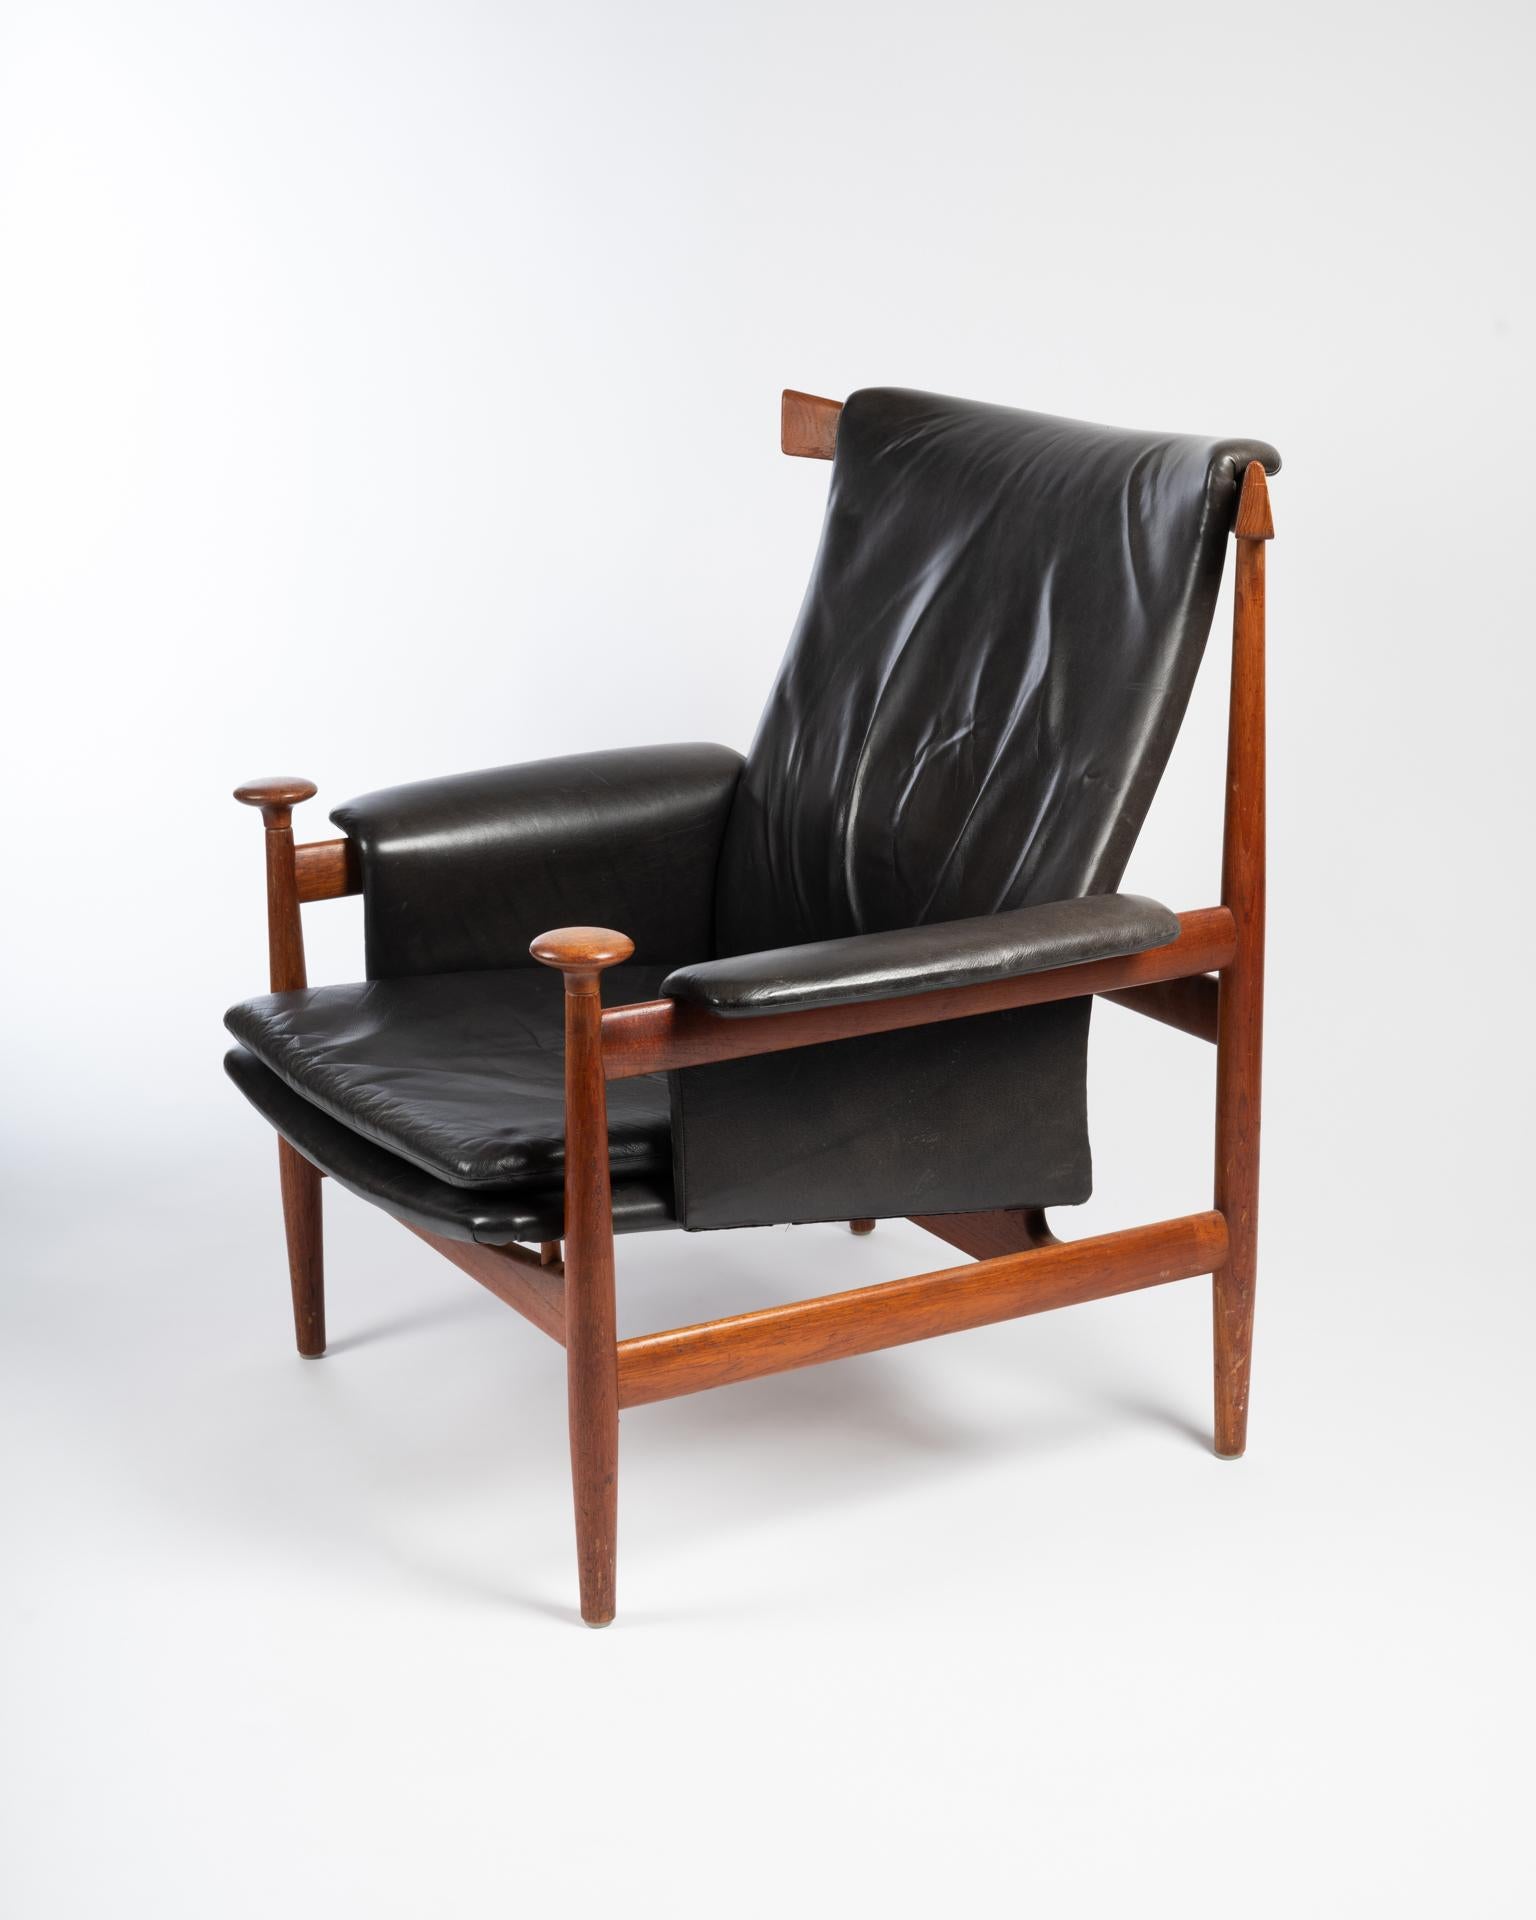 Mid-20th Century Lounge Chair Model 152 Bwana by Finn Juhl for France & Sons, 1962 For Sale